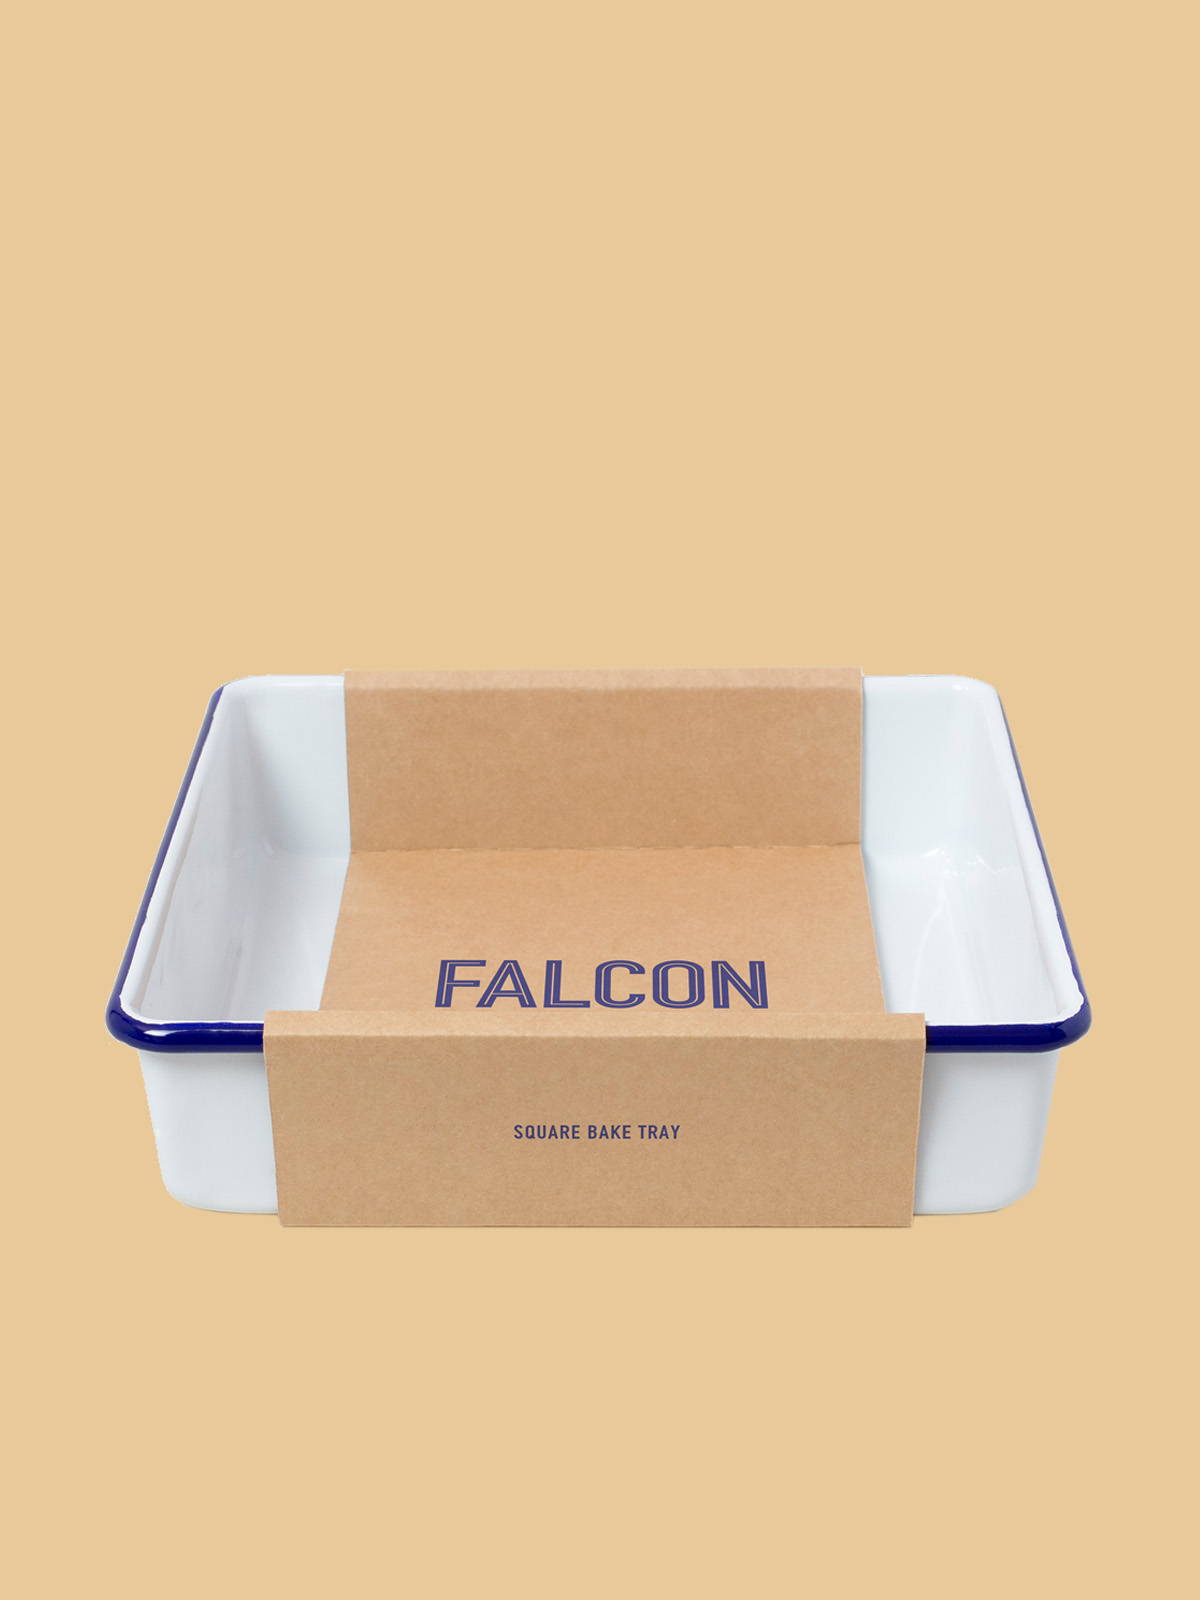 A product image of the Falcon Enamel Square bake tray in original white.